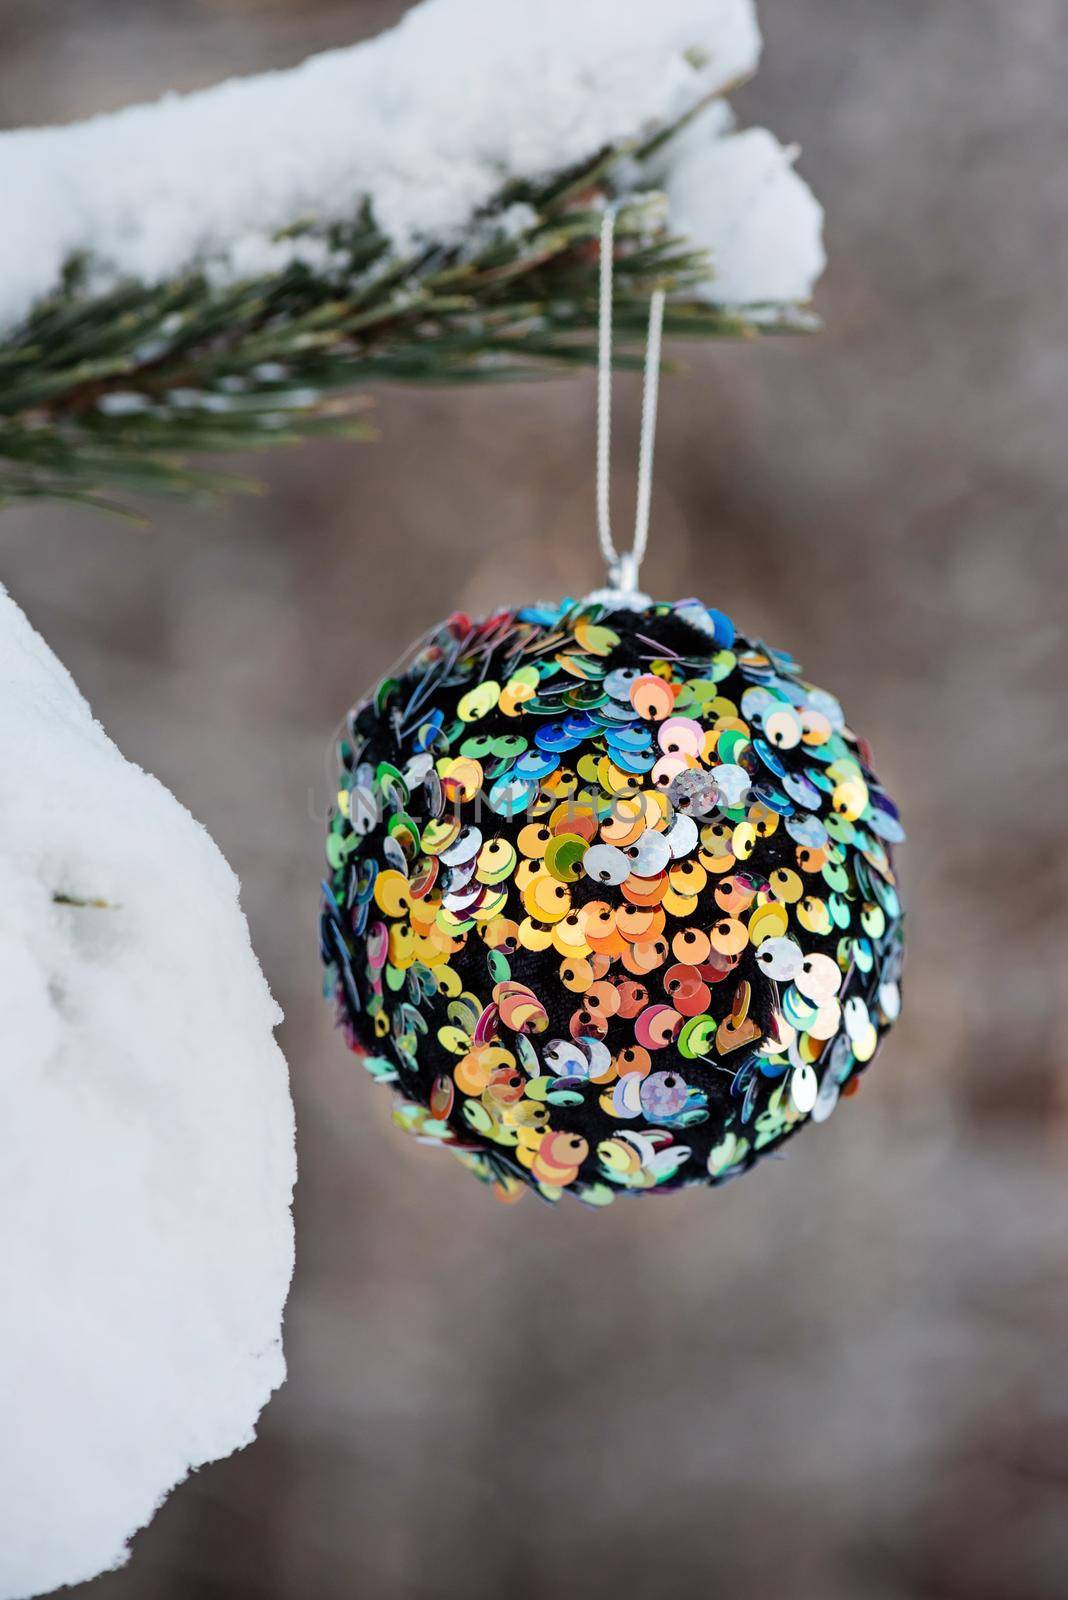 Hanging multi colored glitter Christmas ball on spruce and over blurred background.